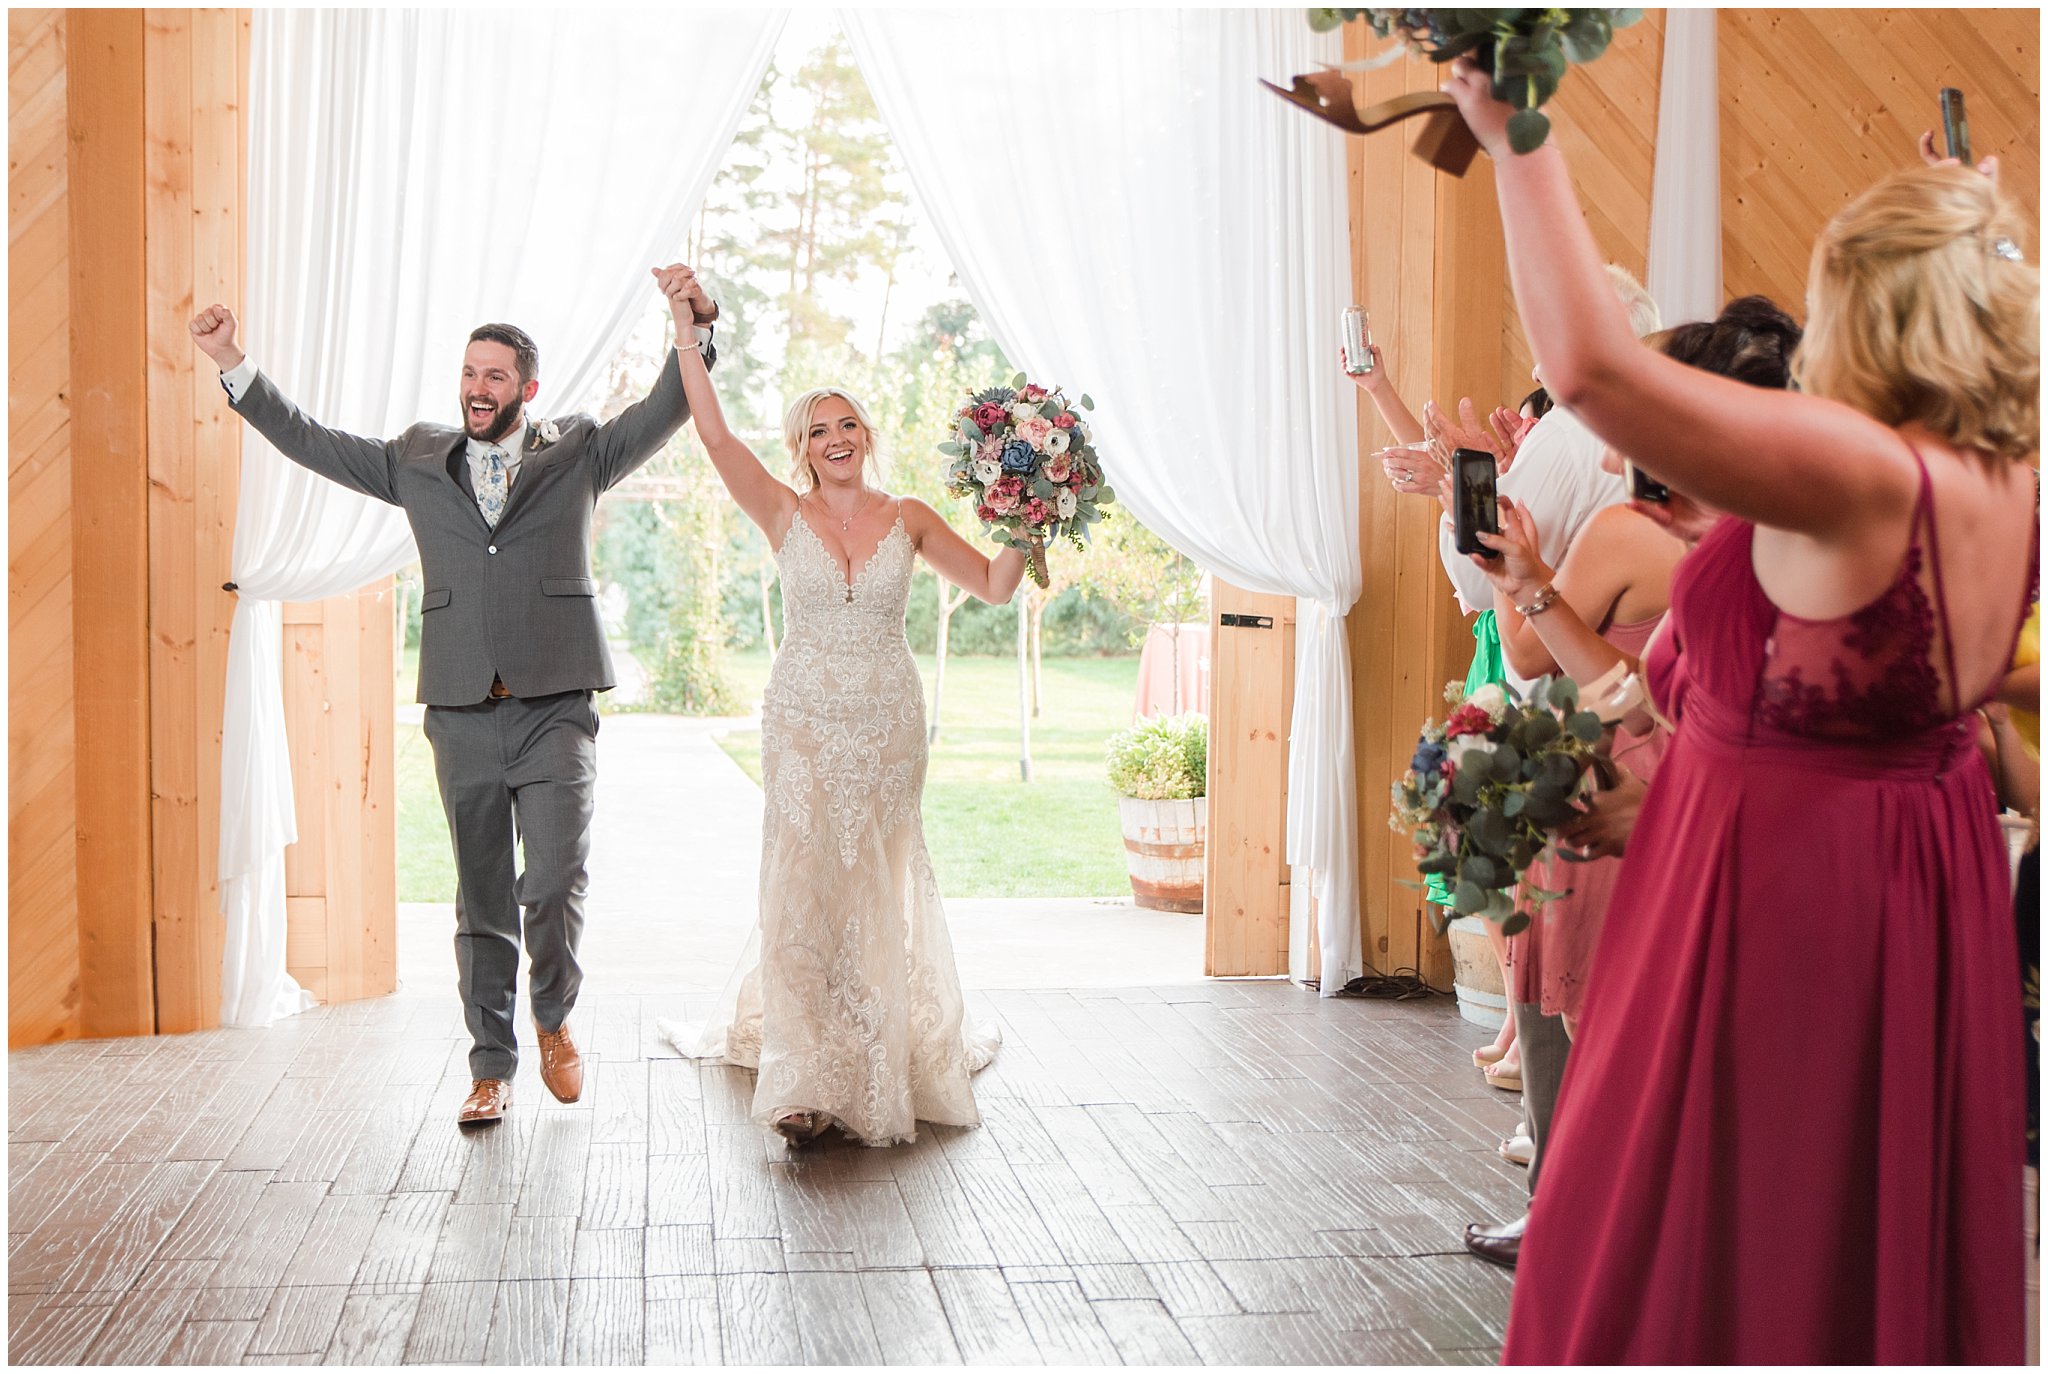 Grand entrance in barn | Dusty Blue and Rose Summer Wedding at Oak Hills Utah | Jessie and Dallin Photography